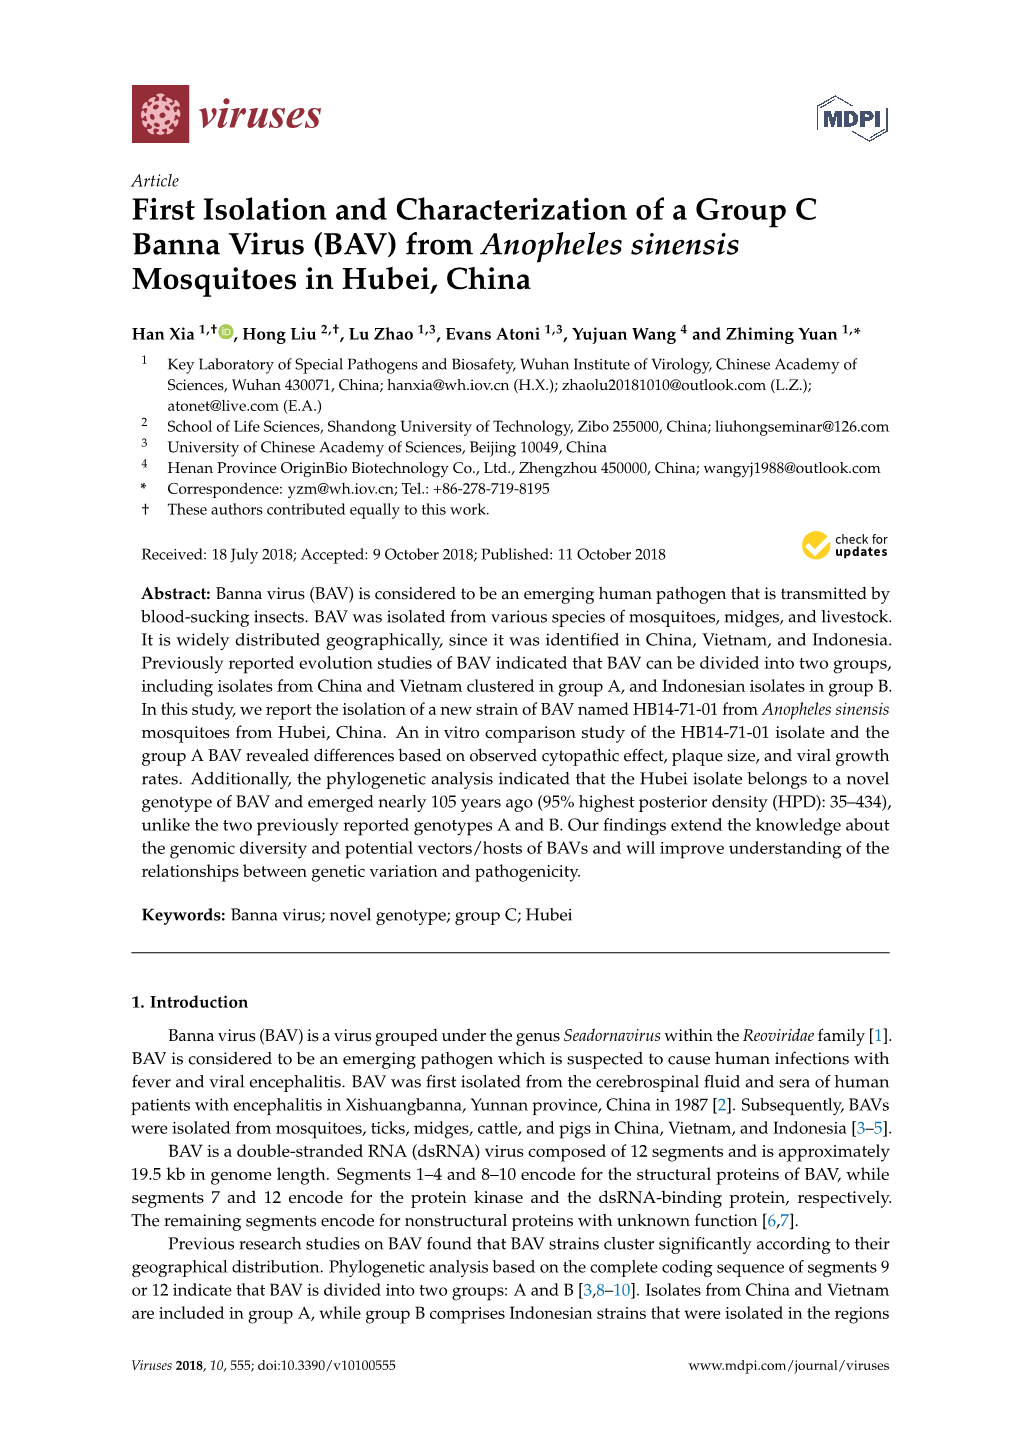 First Isolation and Characterization of a Group C Banna Virus (BAV) from Anopheles Sinensis Mosquitoes in Hubei, China